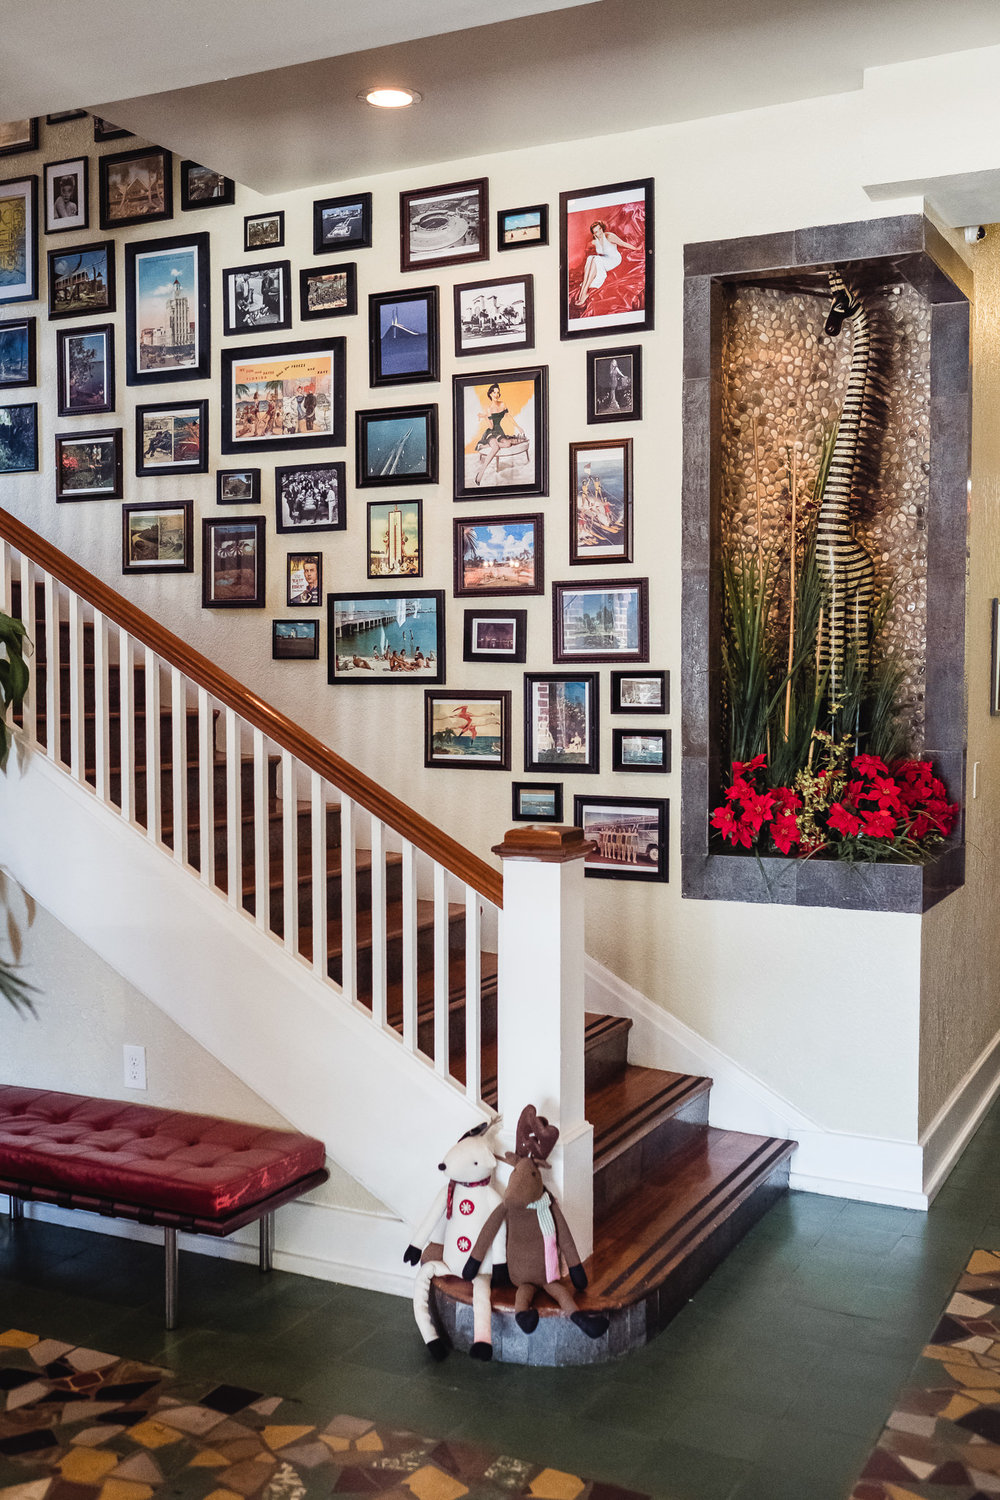 Collage of photographs lining the lobby staircase at the Hollander Hotel in St. Petersburg, Florida